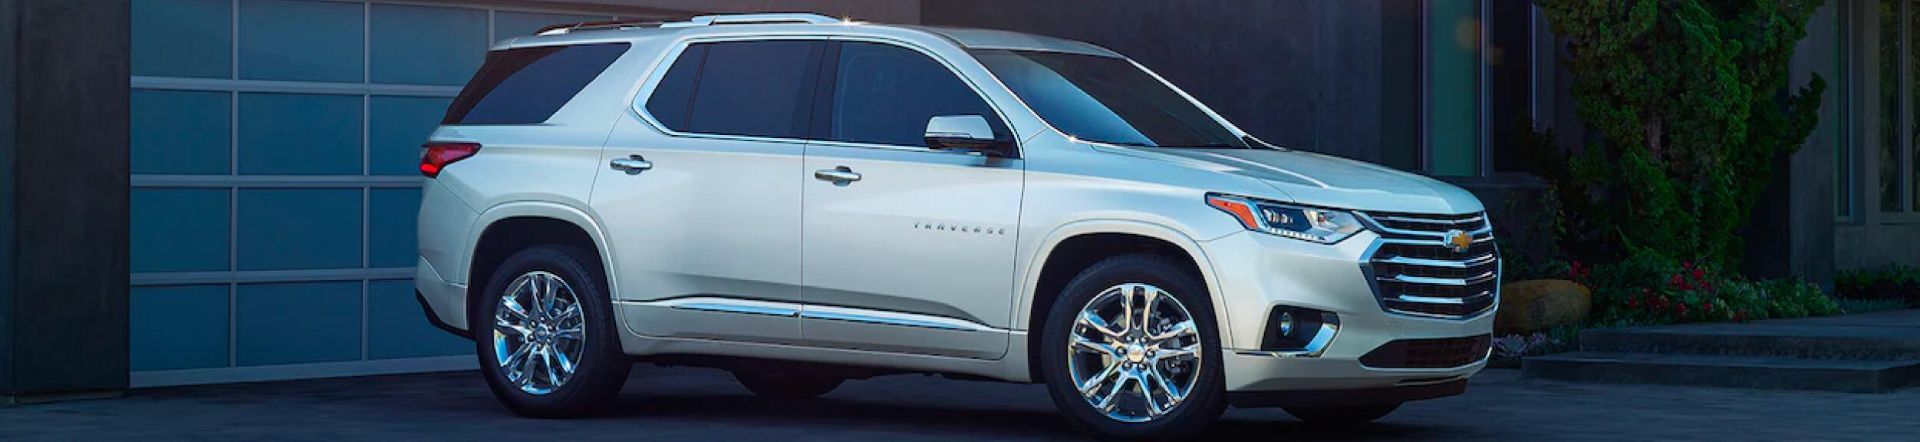 Are You Ready For What’s Next? The 2022 Chevrolet Traverse